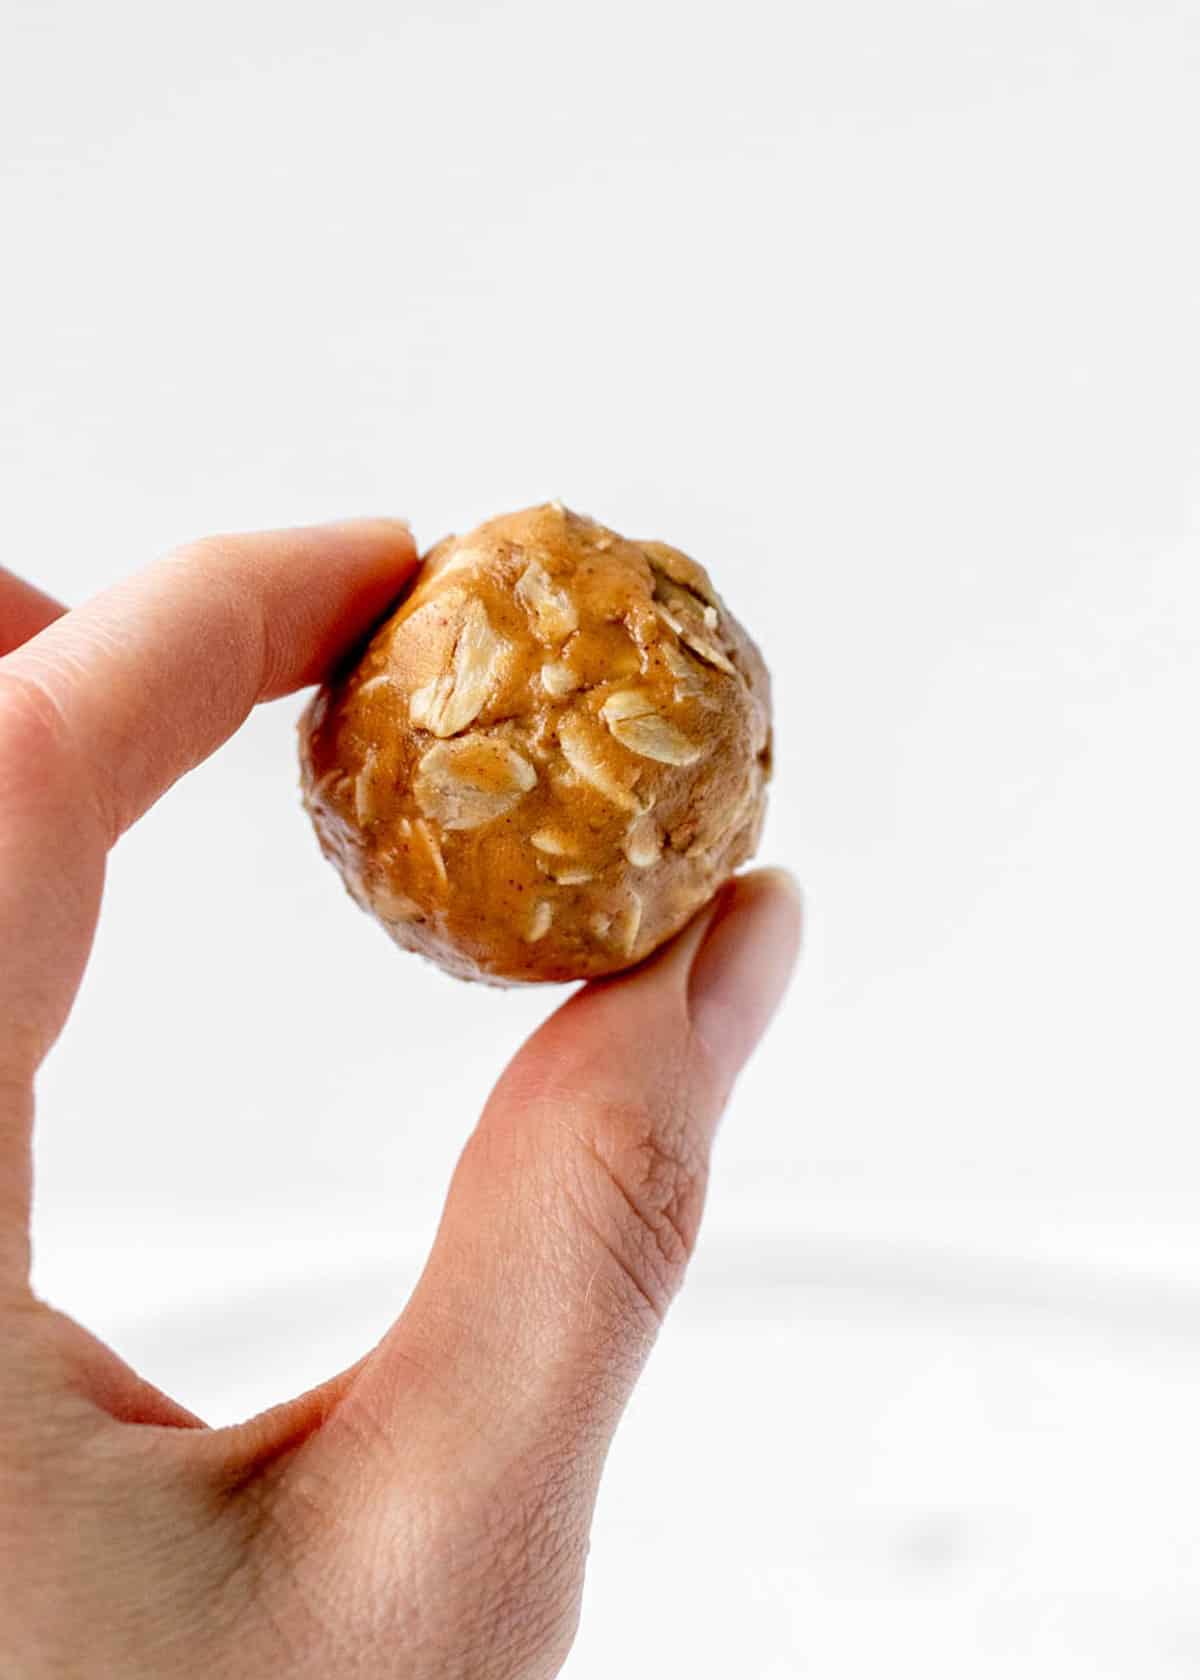 A hand holding up one of the peanut butter honey oatmeal balls.